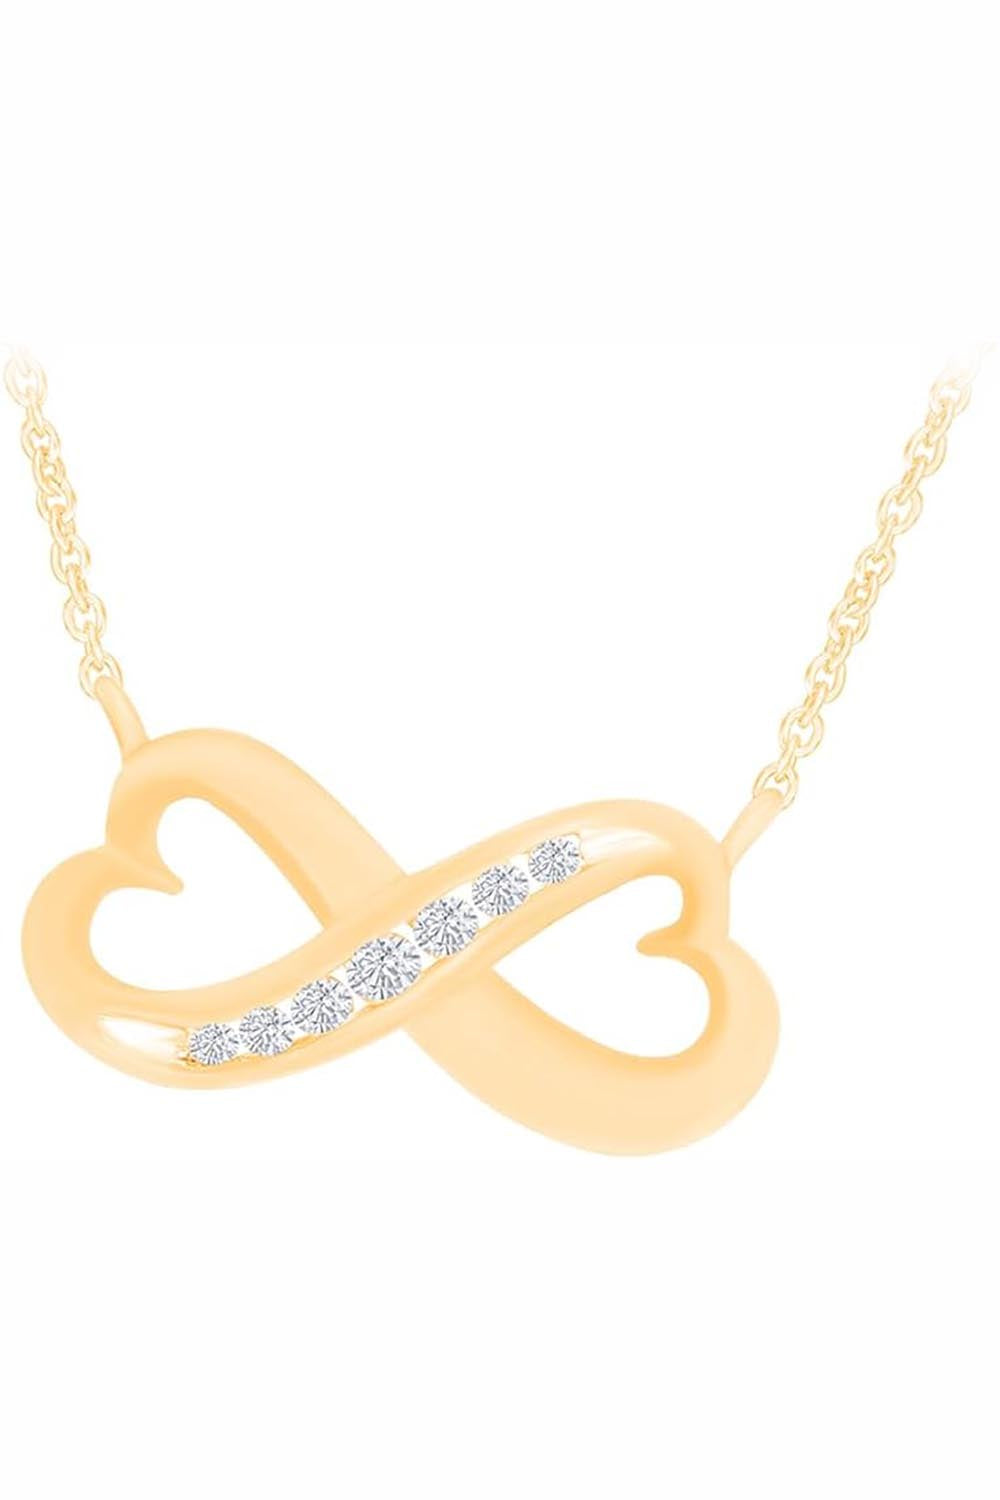 Yellow Gold Color Yaathi Heart-Shape Infinity Necklace, Fashion Jewellery